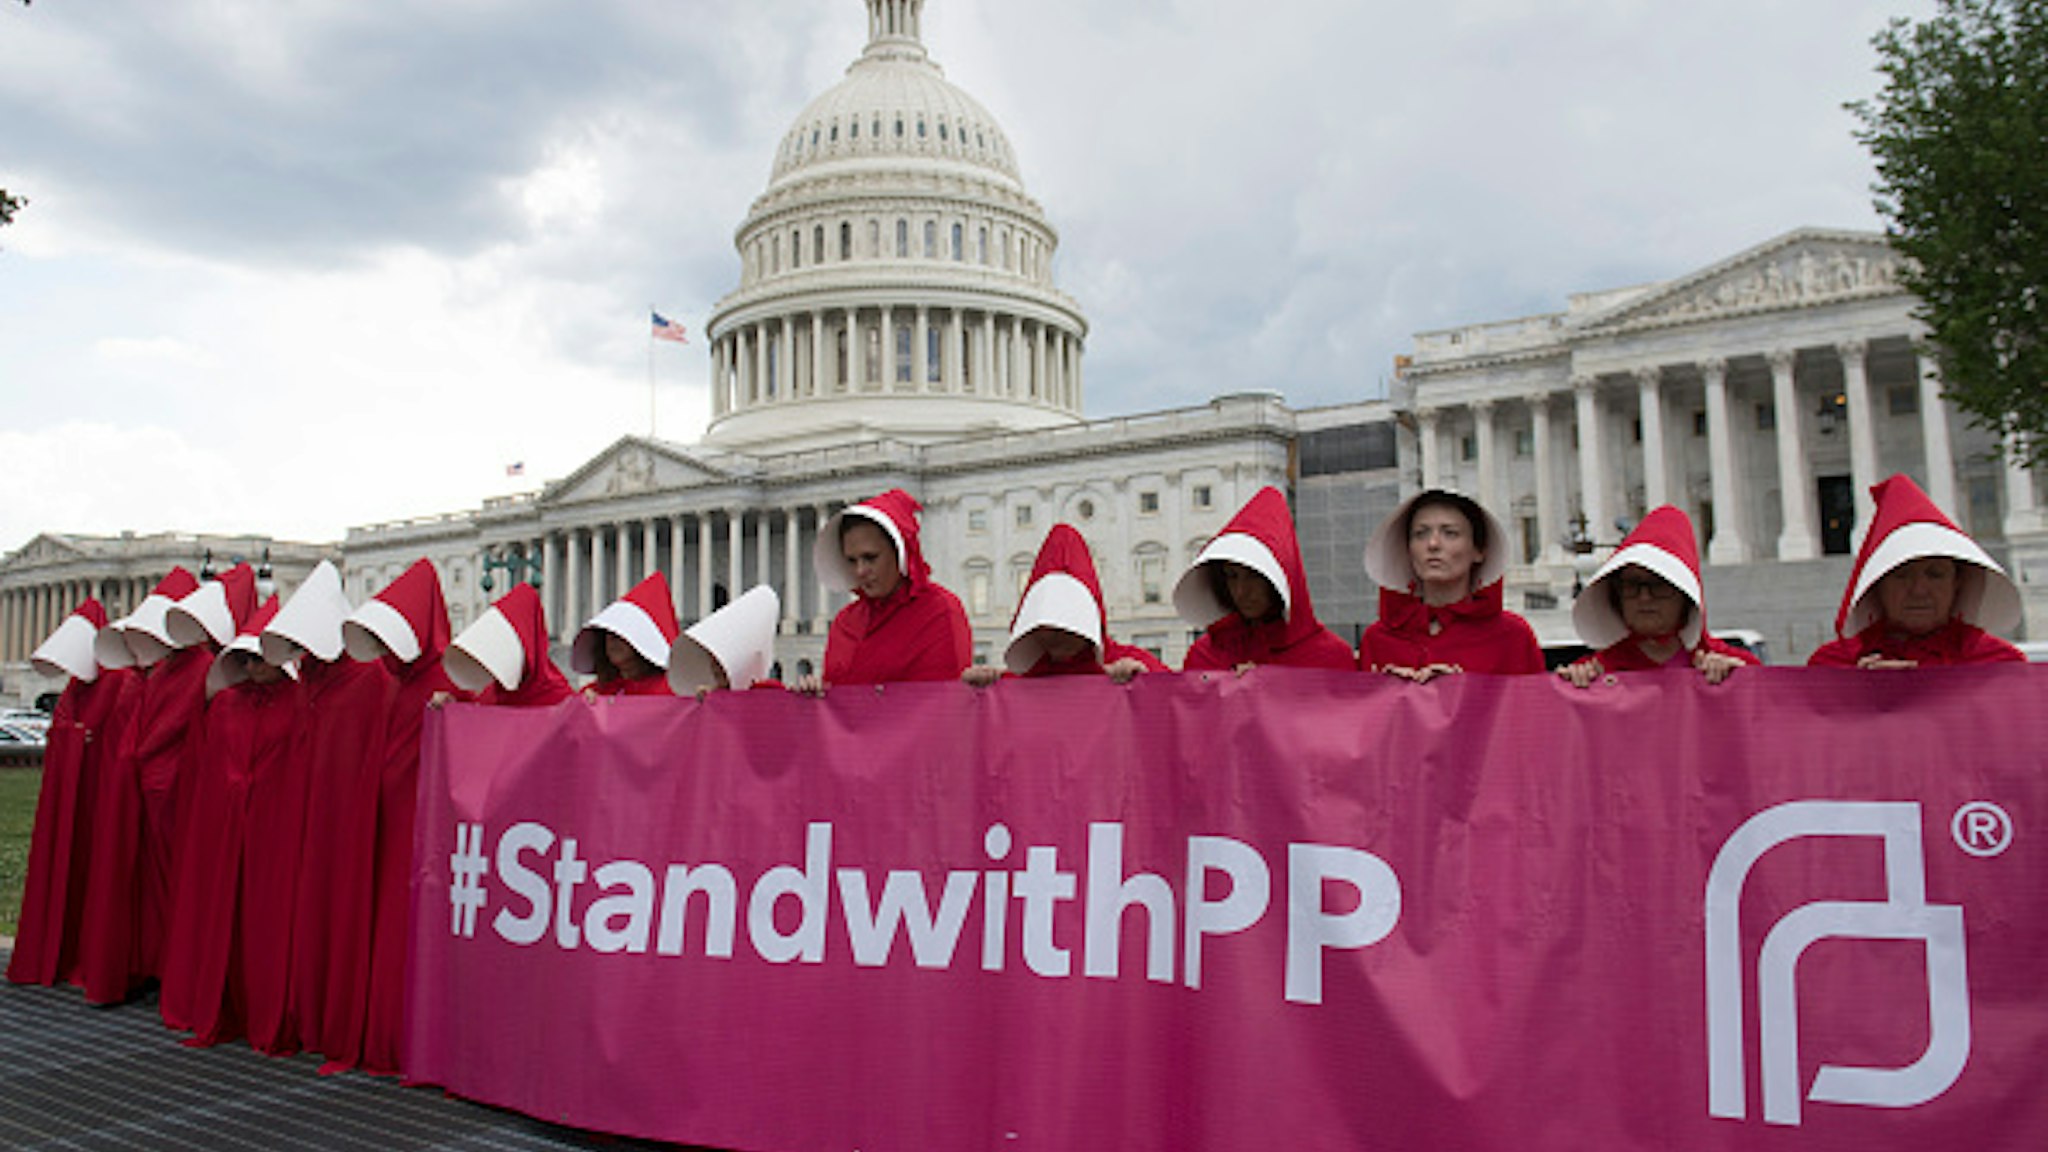 Supporters of Planned Parenthood dressed as characters from "The Handmaid's Tale," hold a rally as they protest the US Senate Republicans' healthcare bill outside the US Capitol in Washington, DC, June 27, 2017. / AFP PHOTO / SAUL LOEB